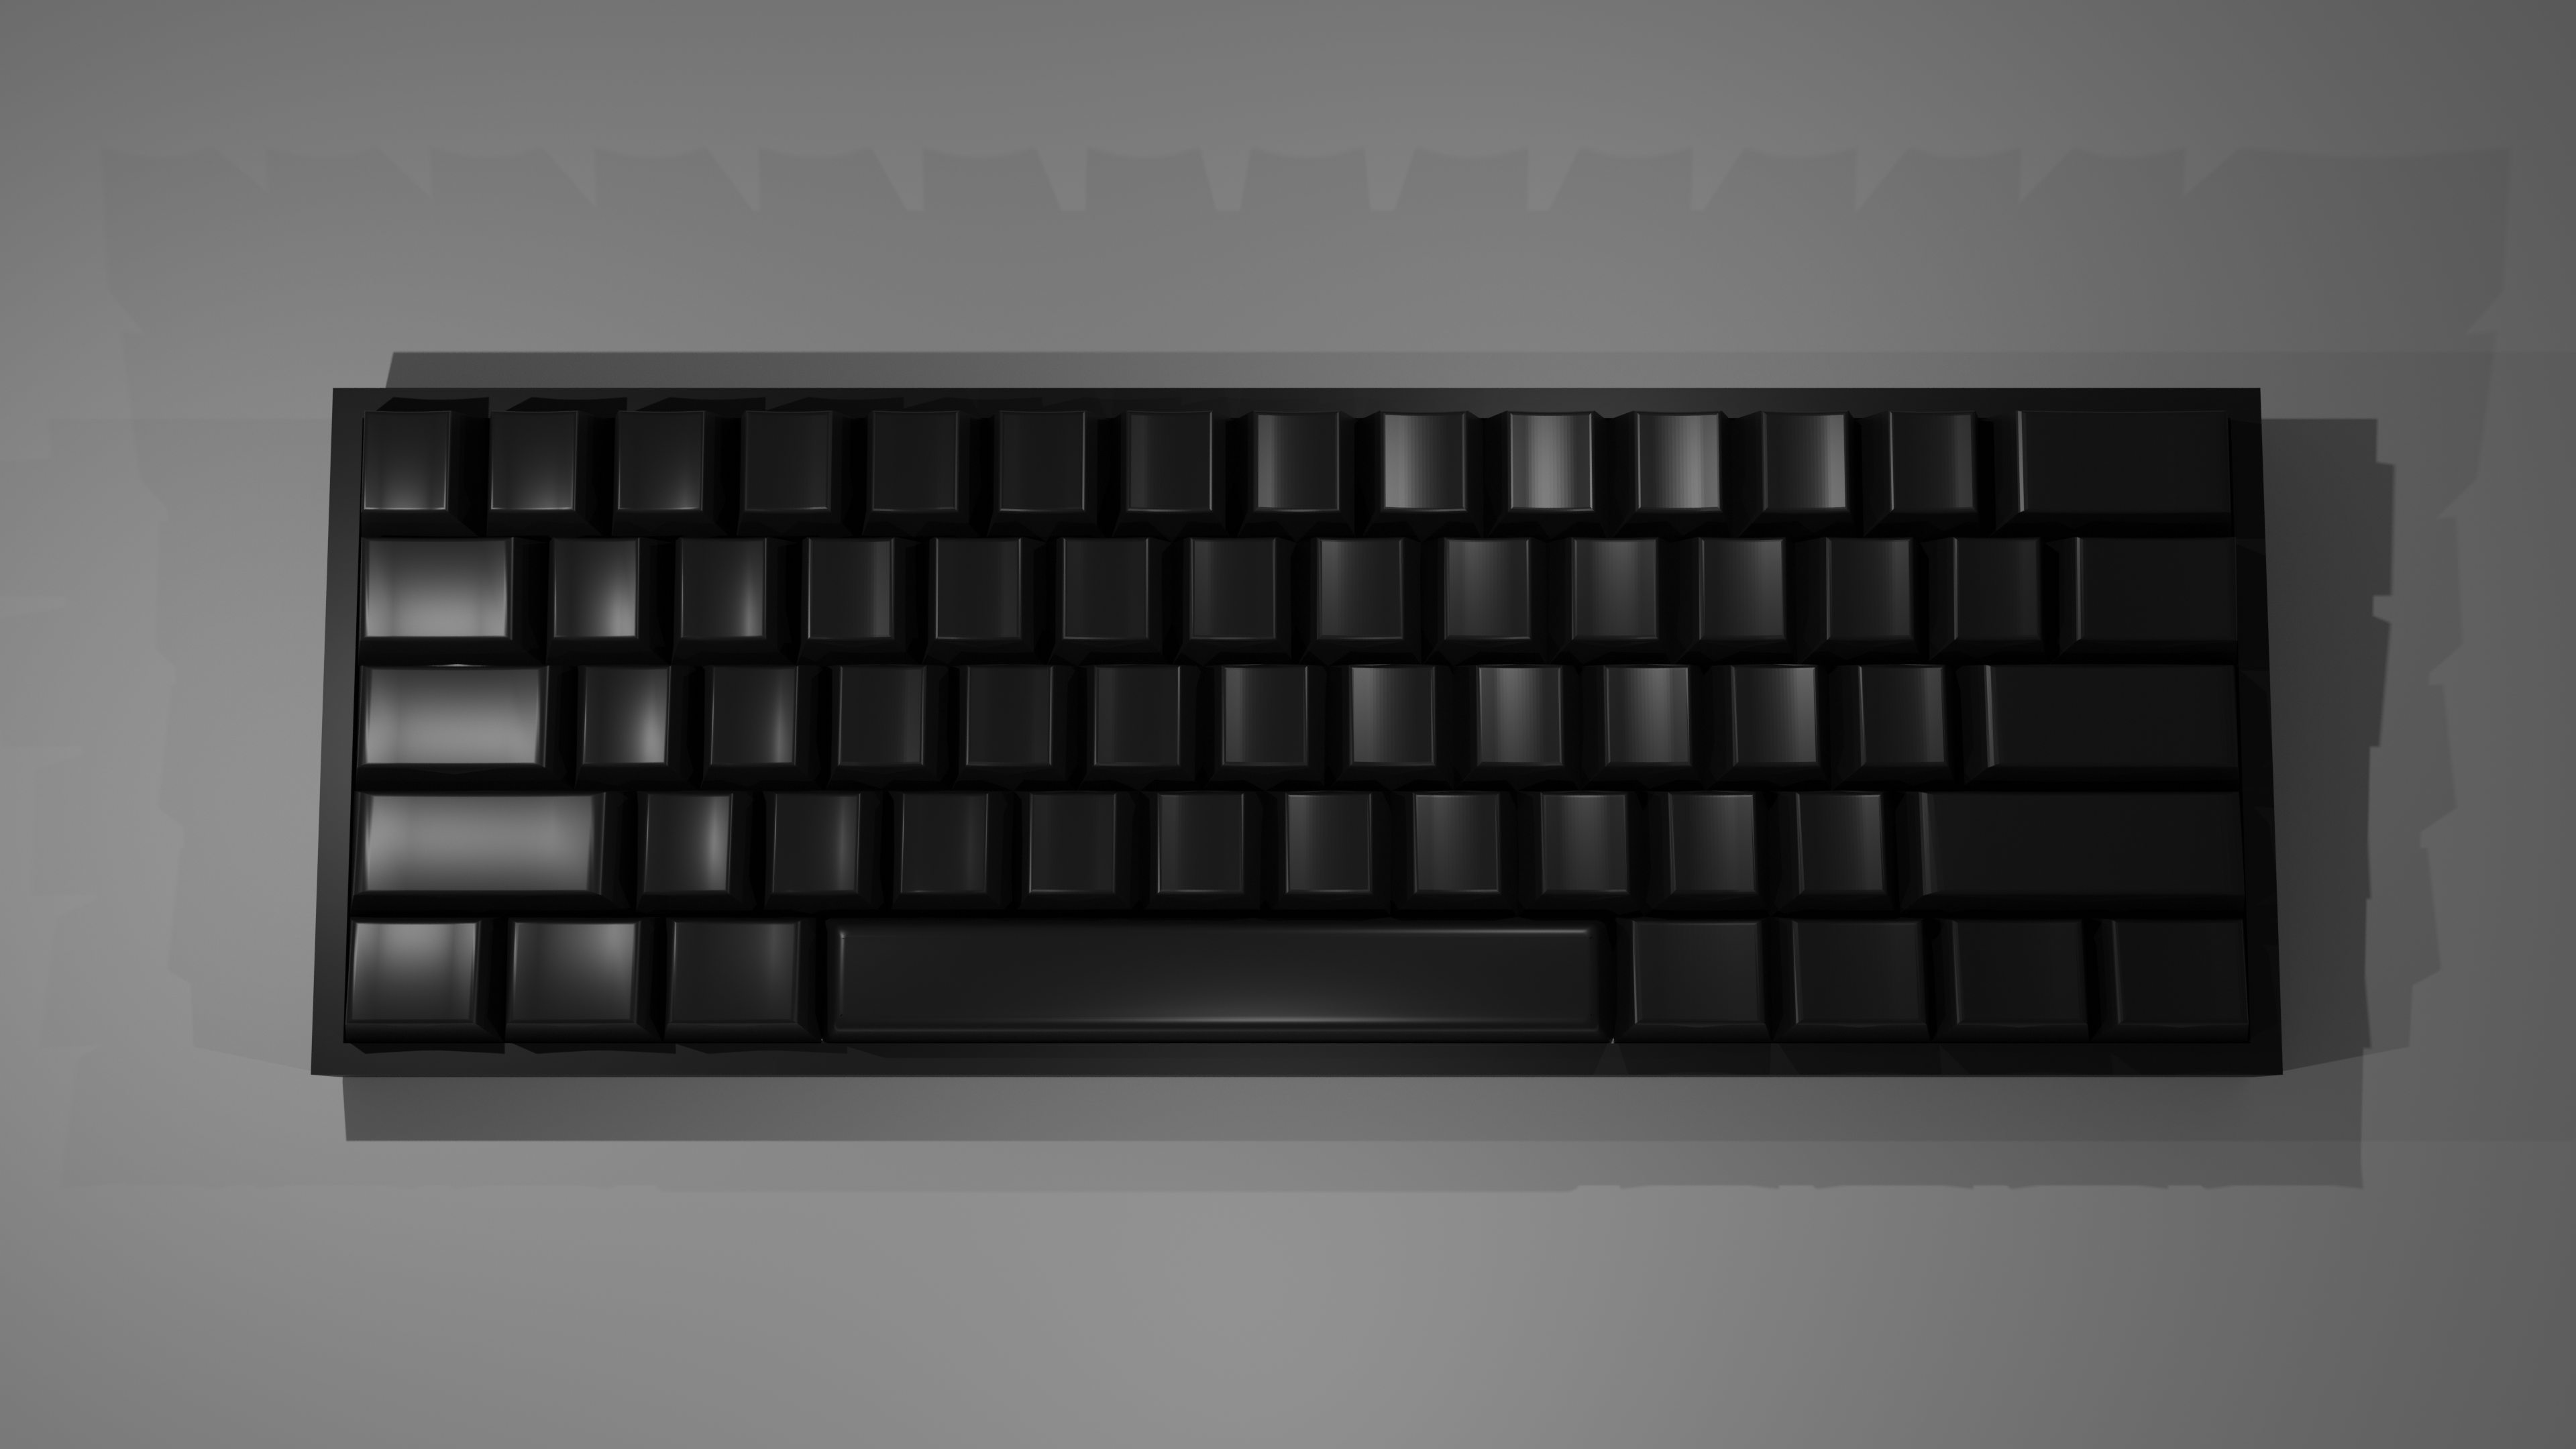 Mechanical keyboard 60% preview image 2